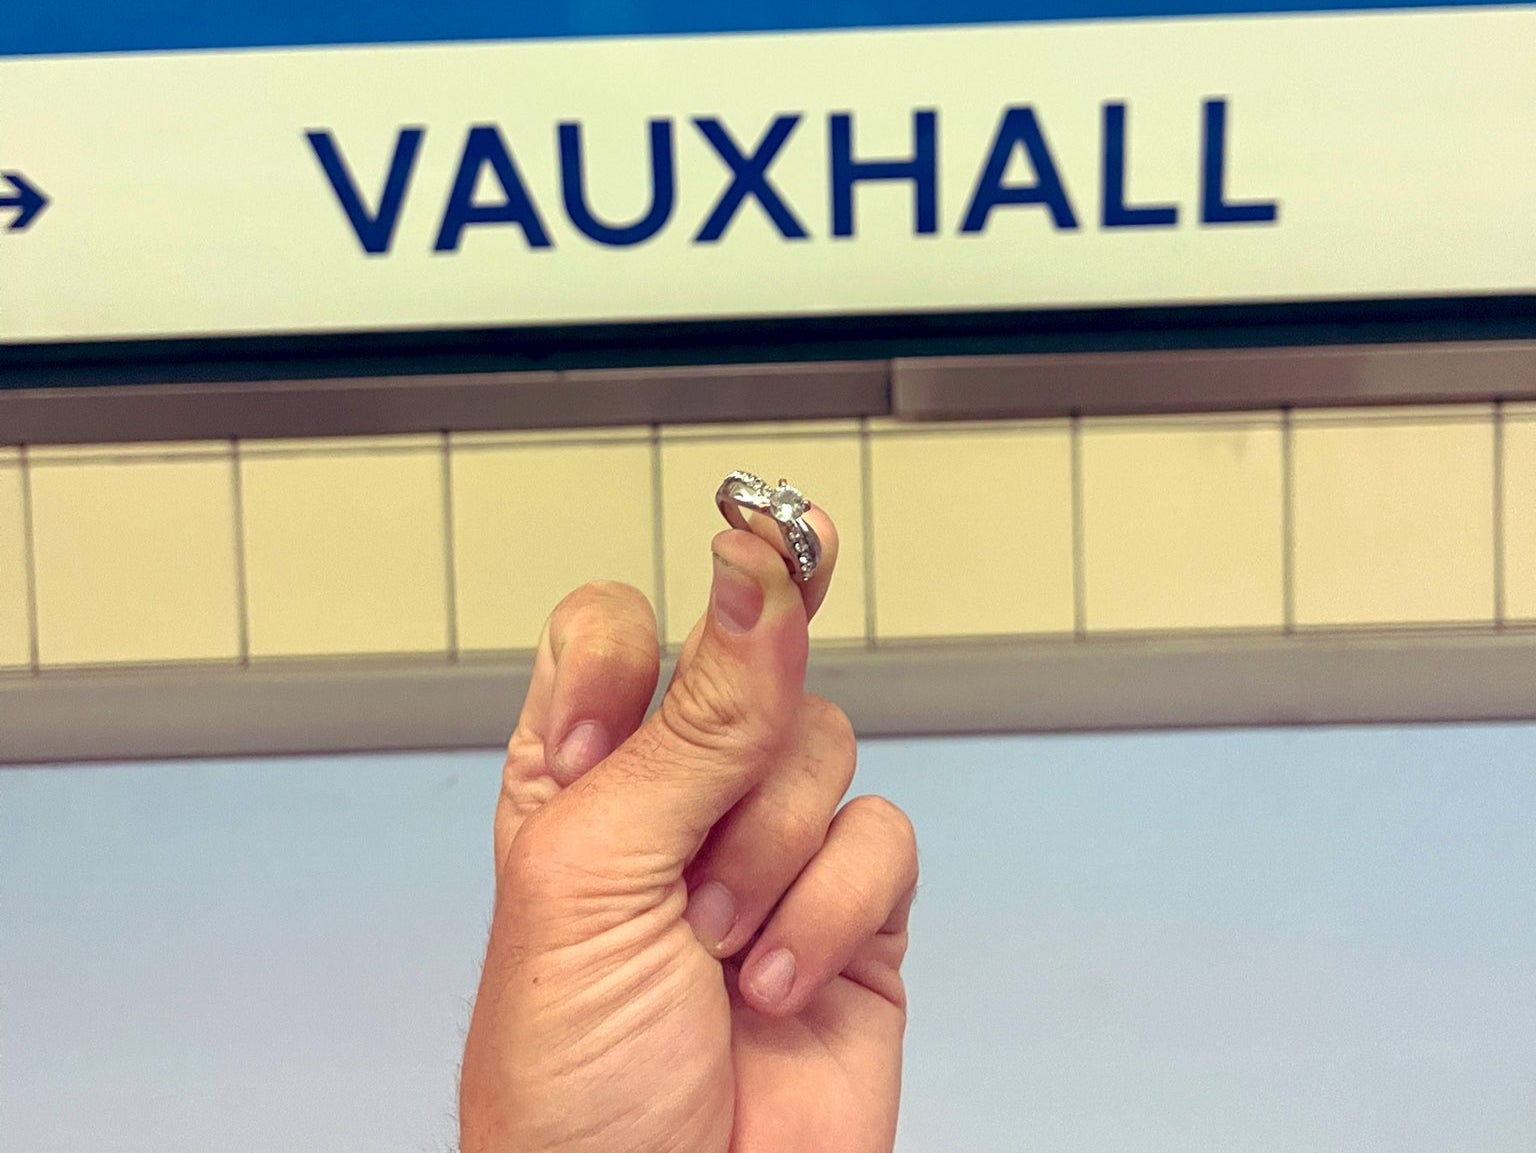 James Flude found an engagement ring on a platform in Vauxhall London Underground station and is searching for its rightful owner